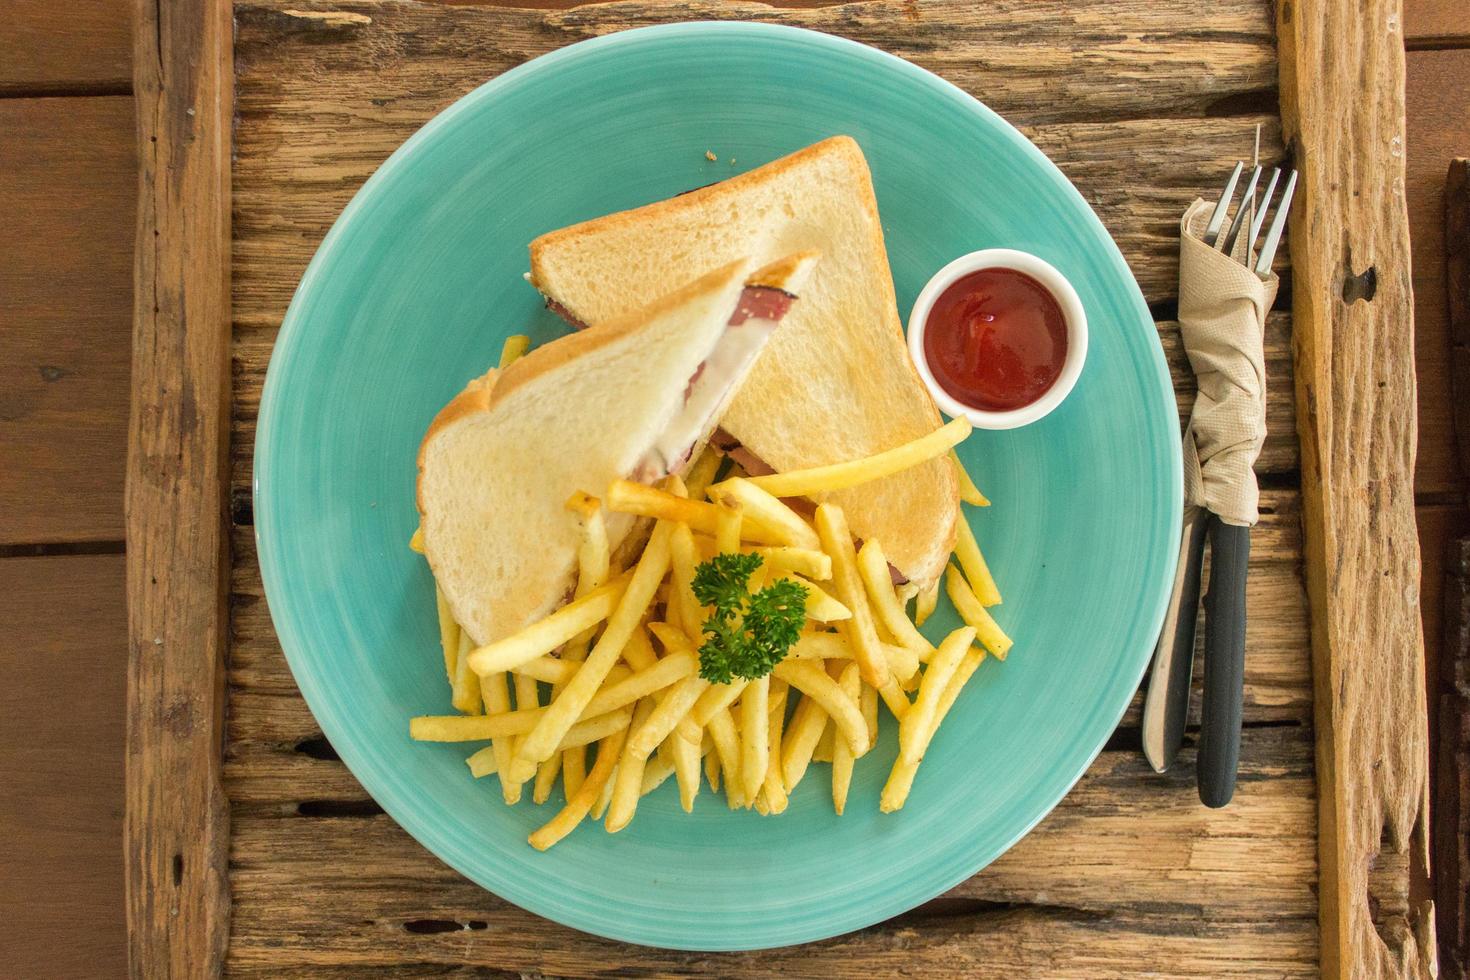 Ham and cheese sandwich with french fries on blue plate photo